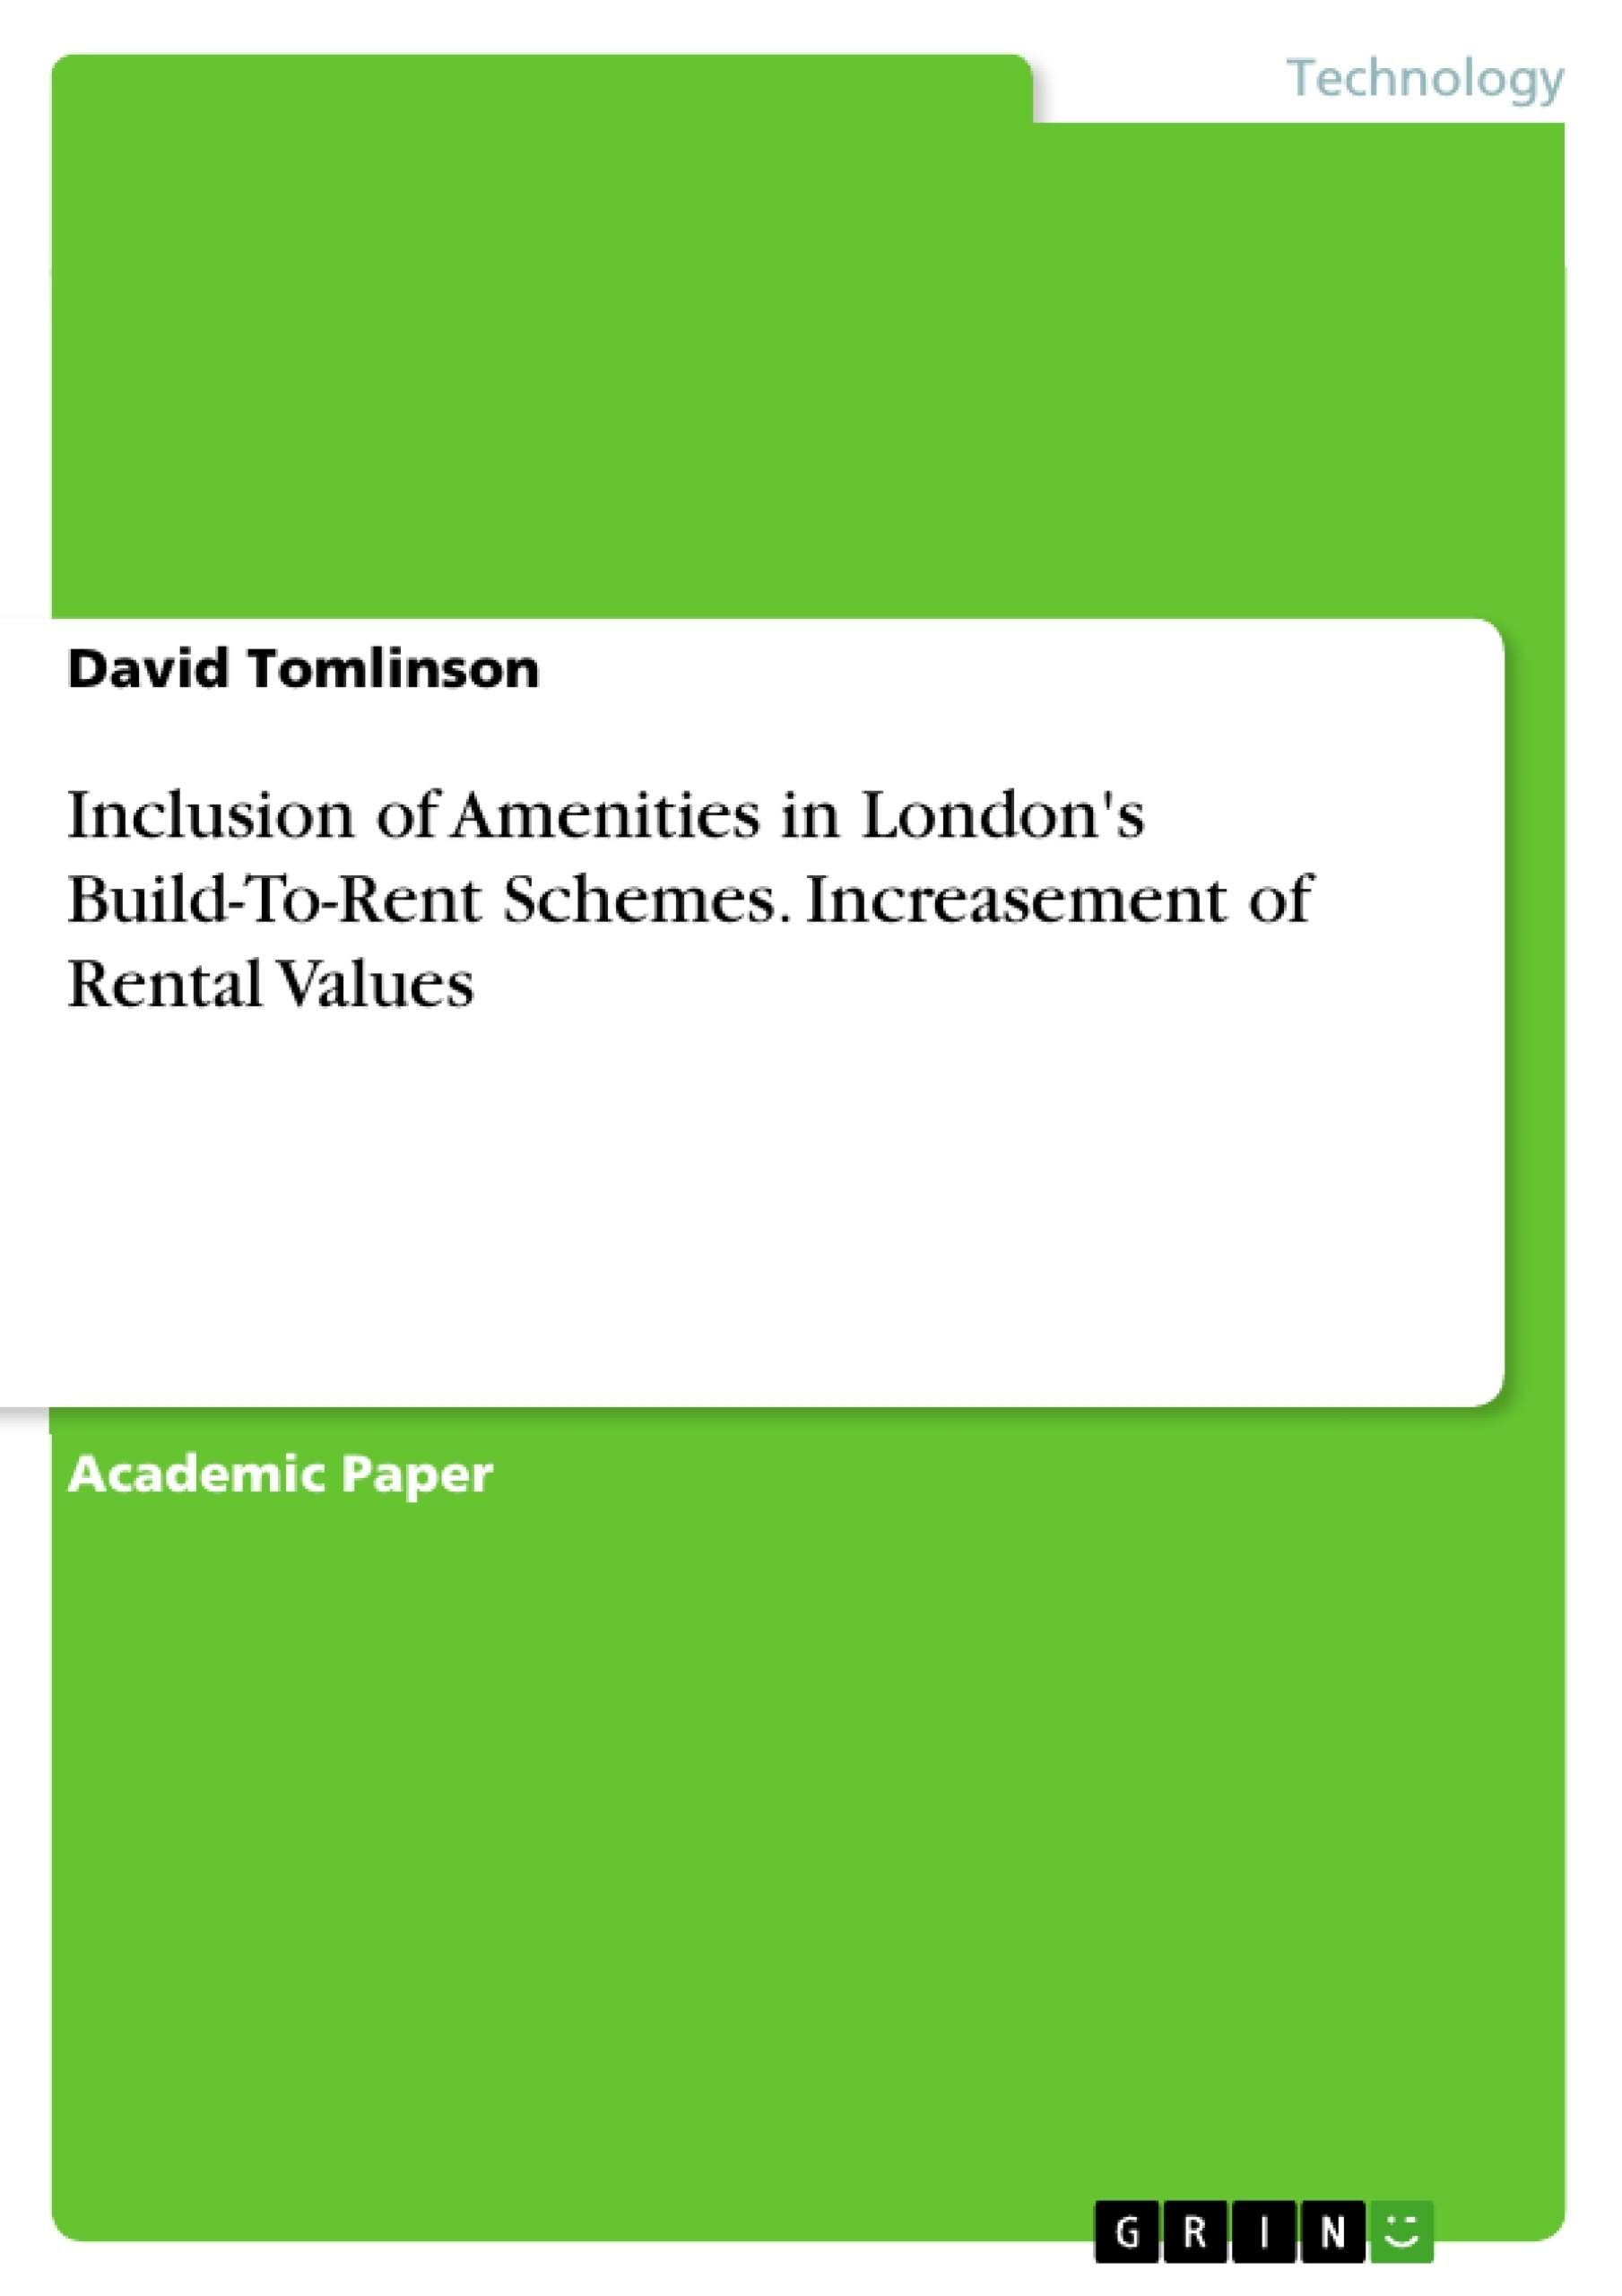 Title: Inclusion of Amenities in London's Build-To-Rent Schemes. Increasement of Rental Values